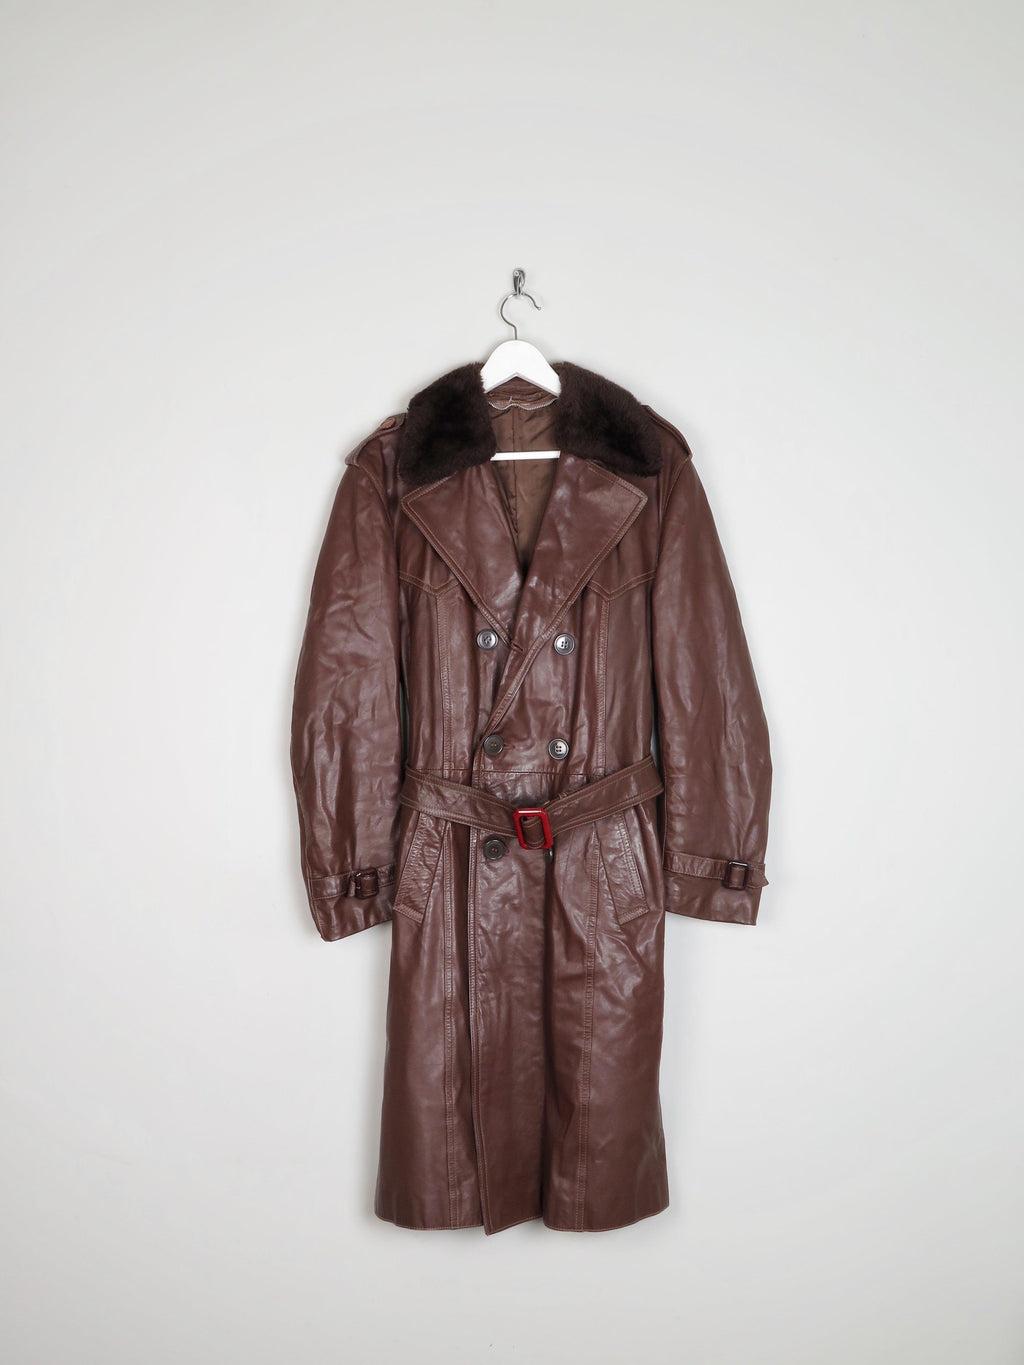 Men’s Wine 1970s Vintage Leather Coat With Faux Fur Collar 40/42 M - The Harlequin